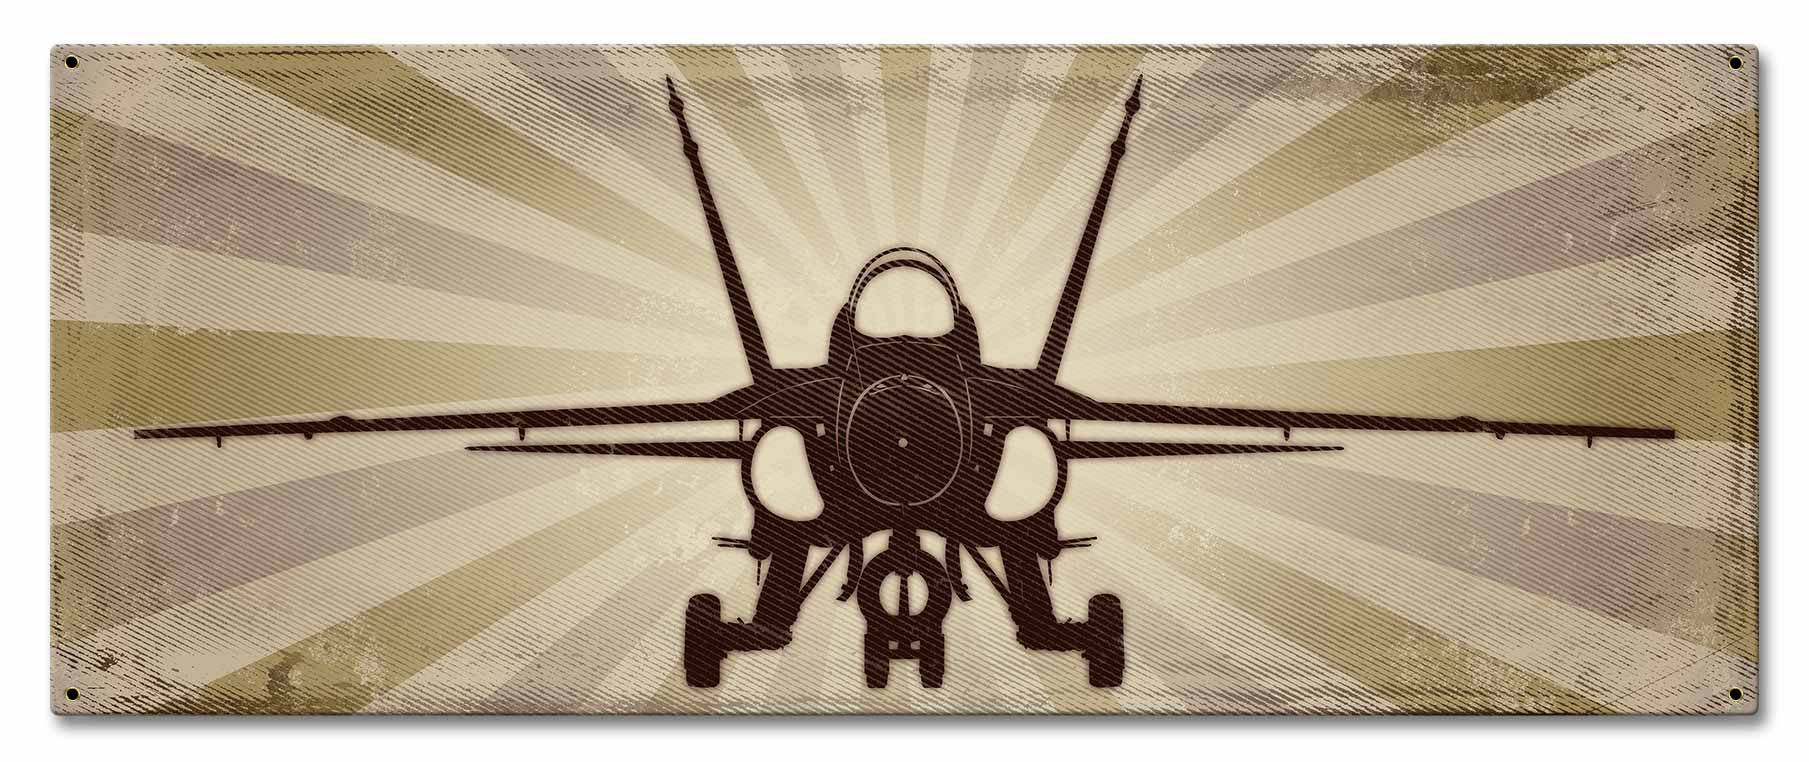 Click to view more Vintage Plane Signs Signs